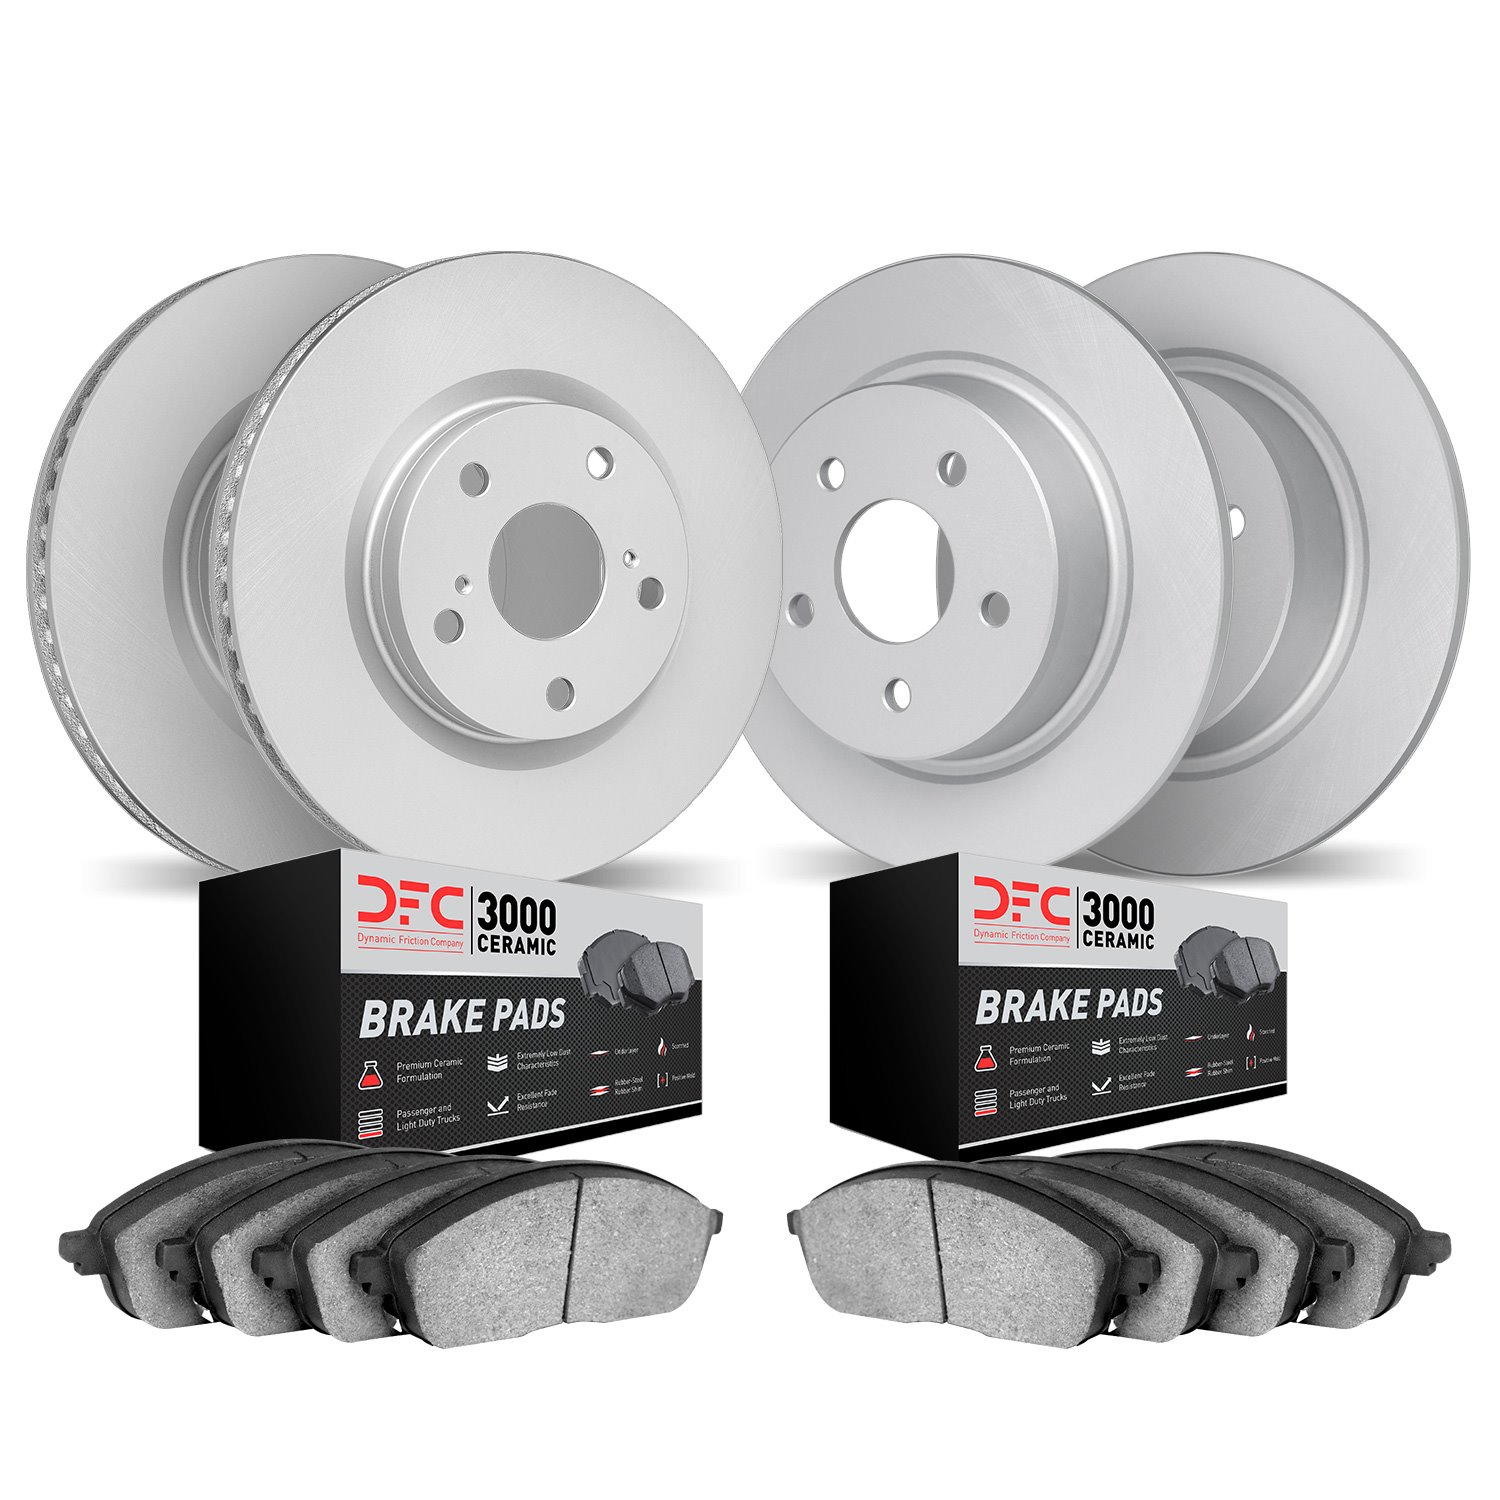 4304-74015 Geospec Brake Rotors with 3000-Series Ceramic Brake Pads Kit, 1999-2010 Audi/Volkswagen, Position: Front and Rear